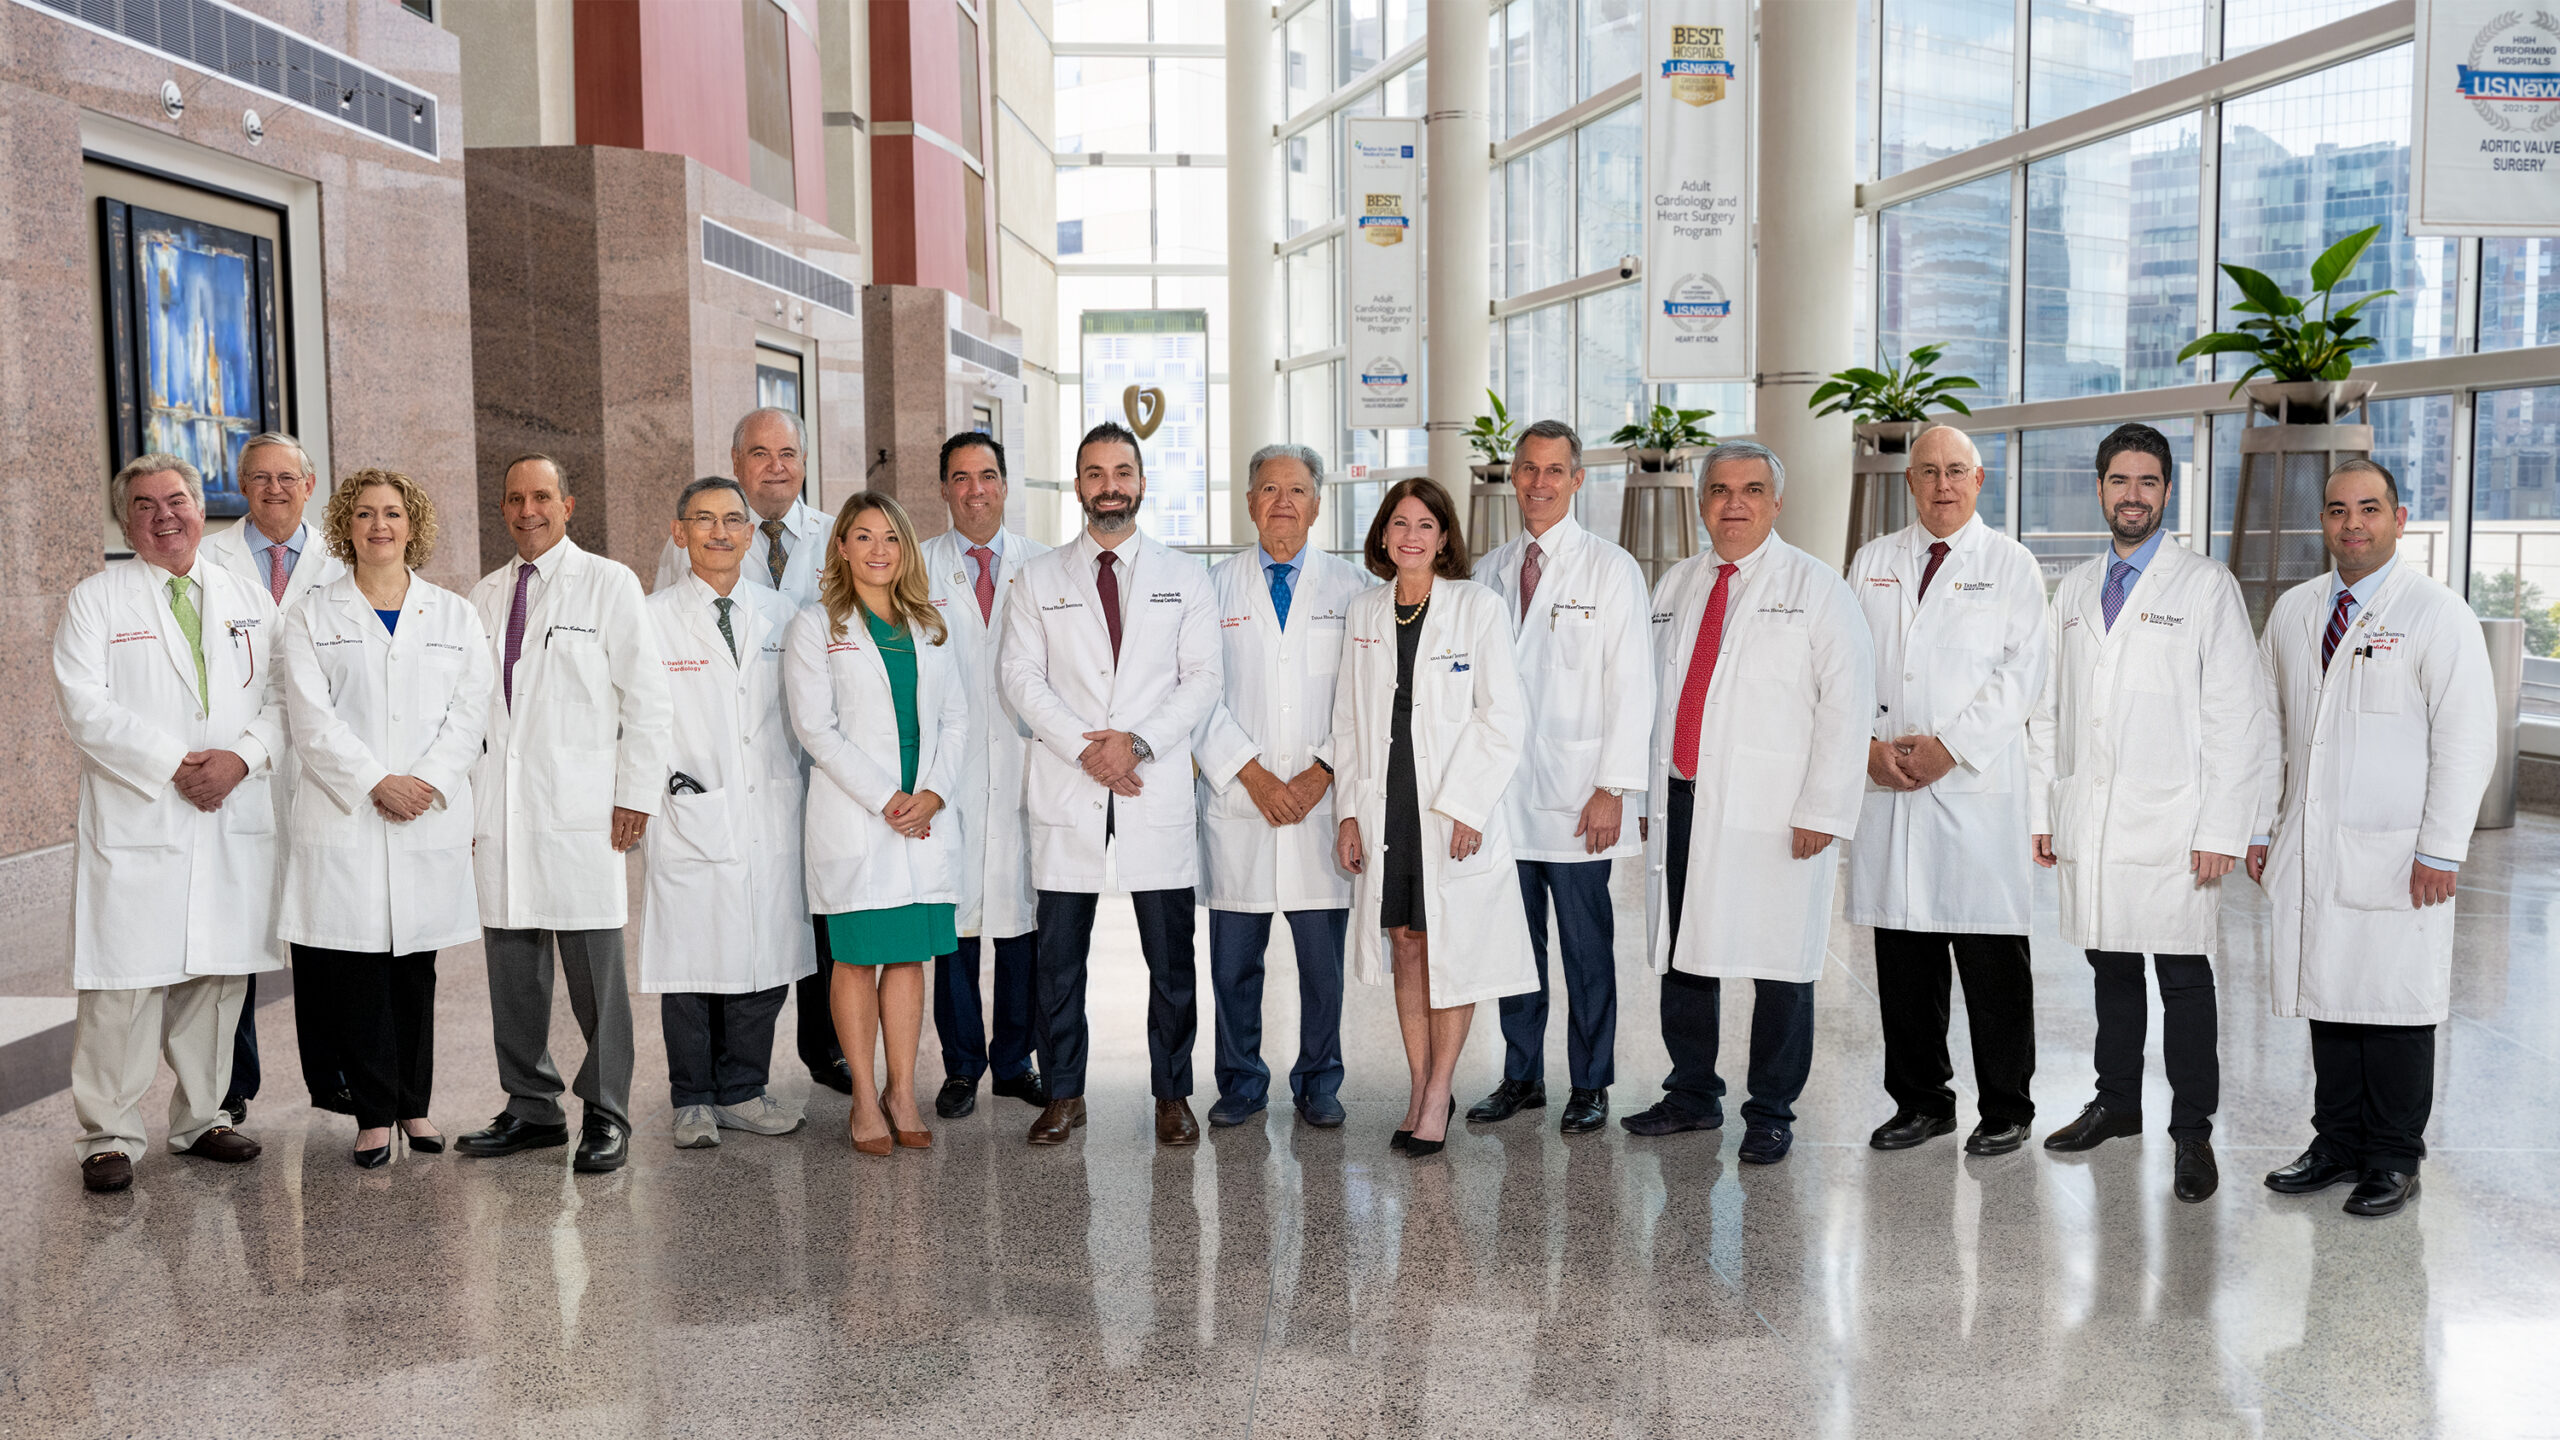 16 Physicians | The Texas Heart Institute Center for Cardiovascular Care